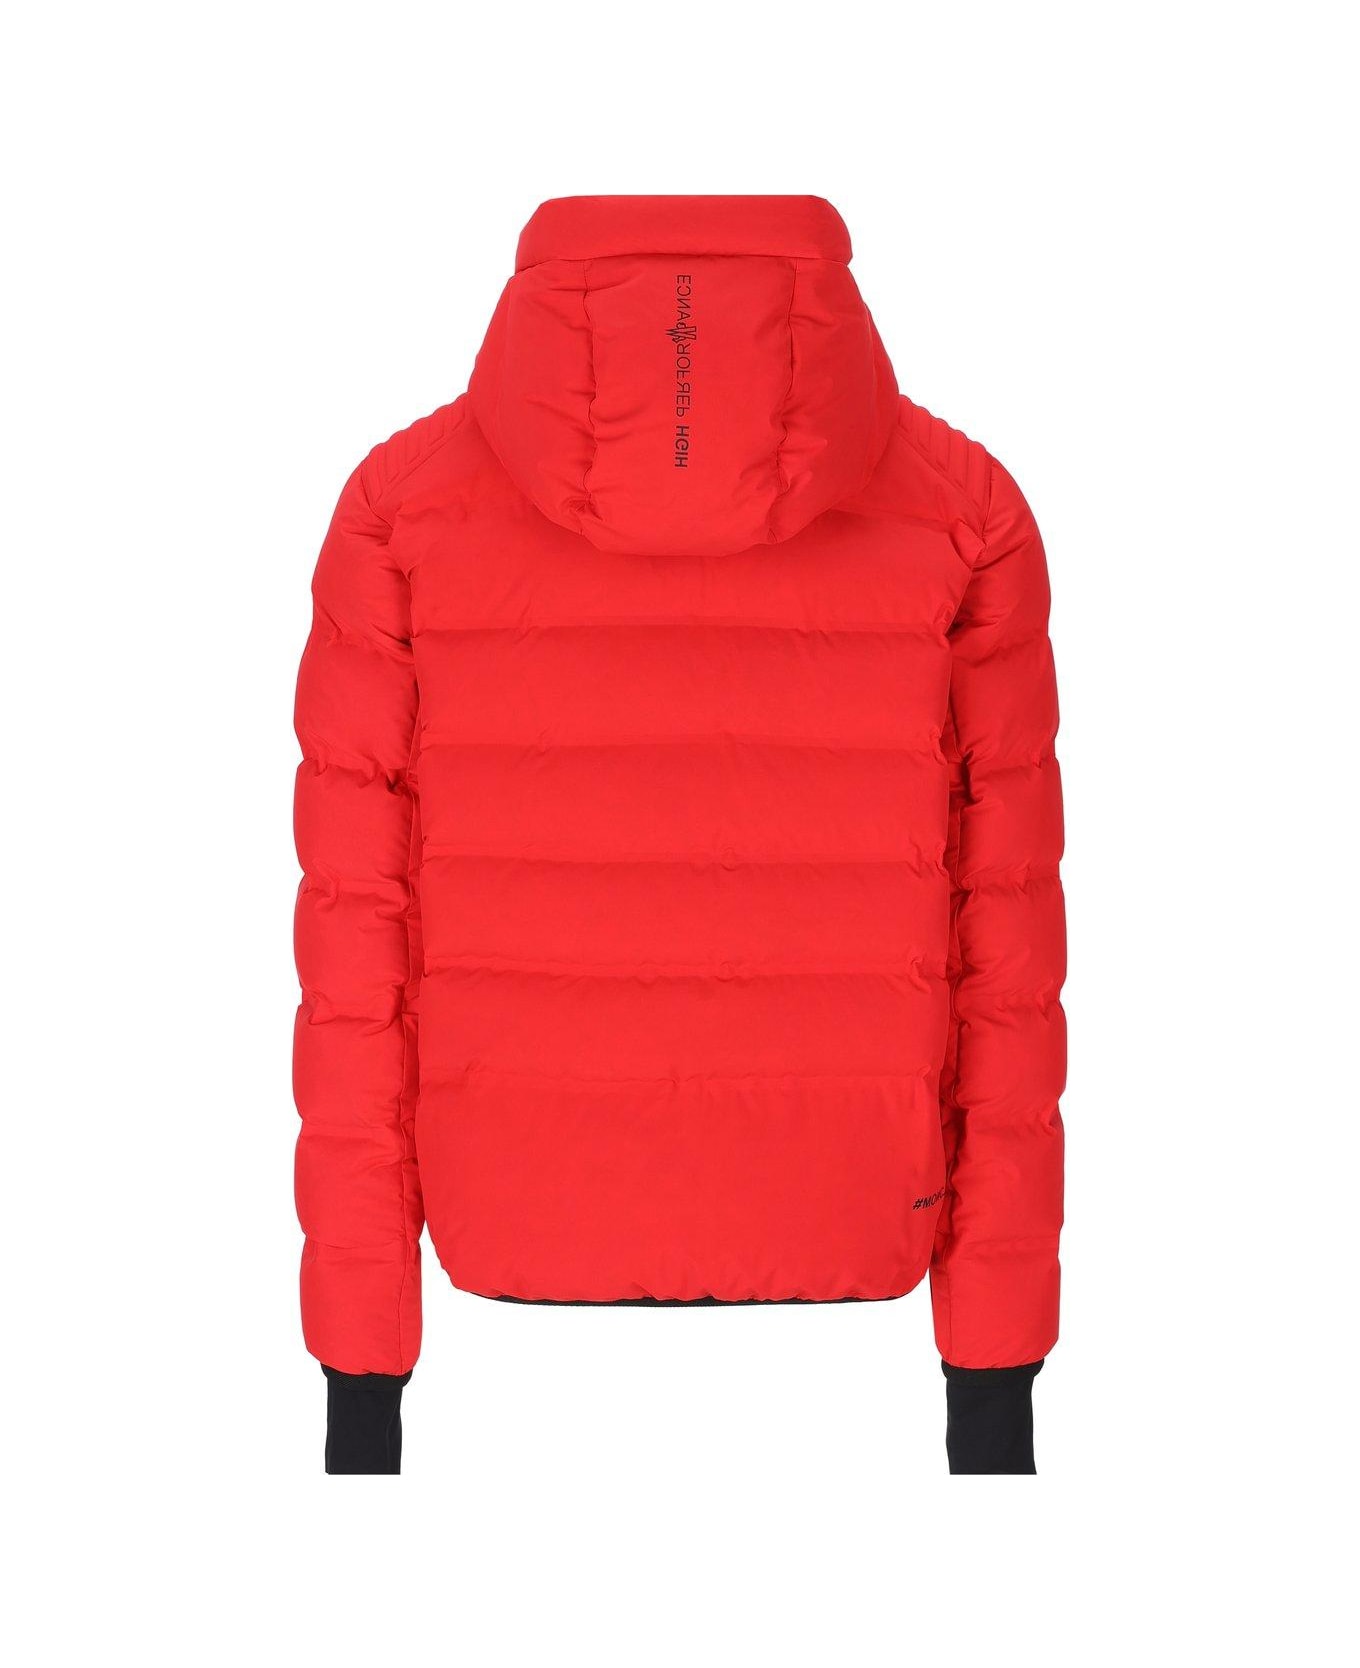 Moncler Grenoble Red Lagorai Short Down Jacket - Red